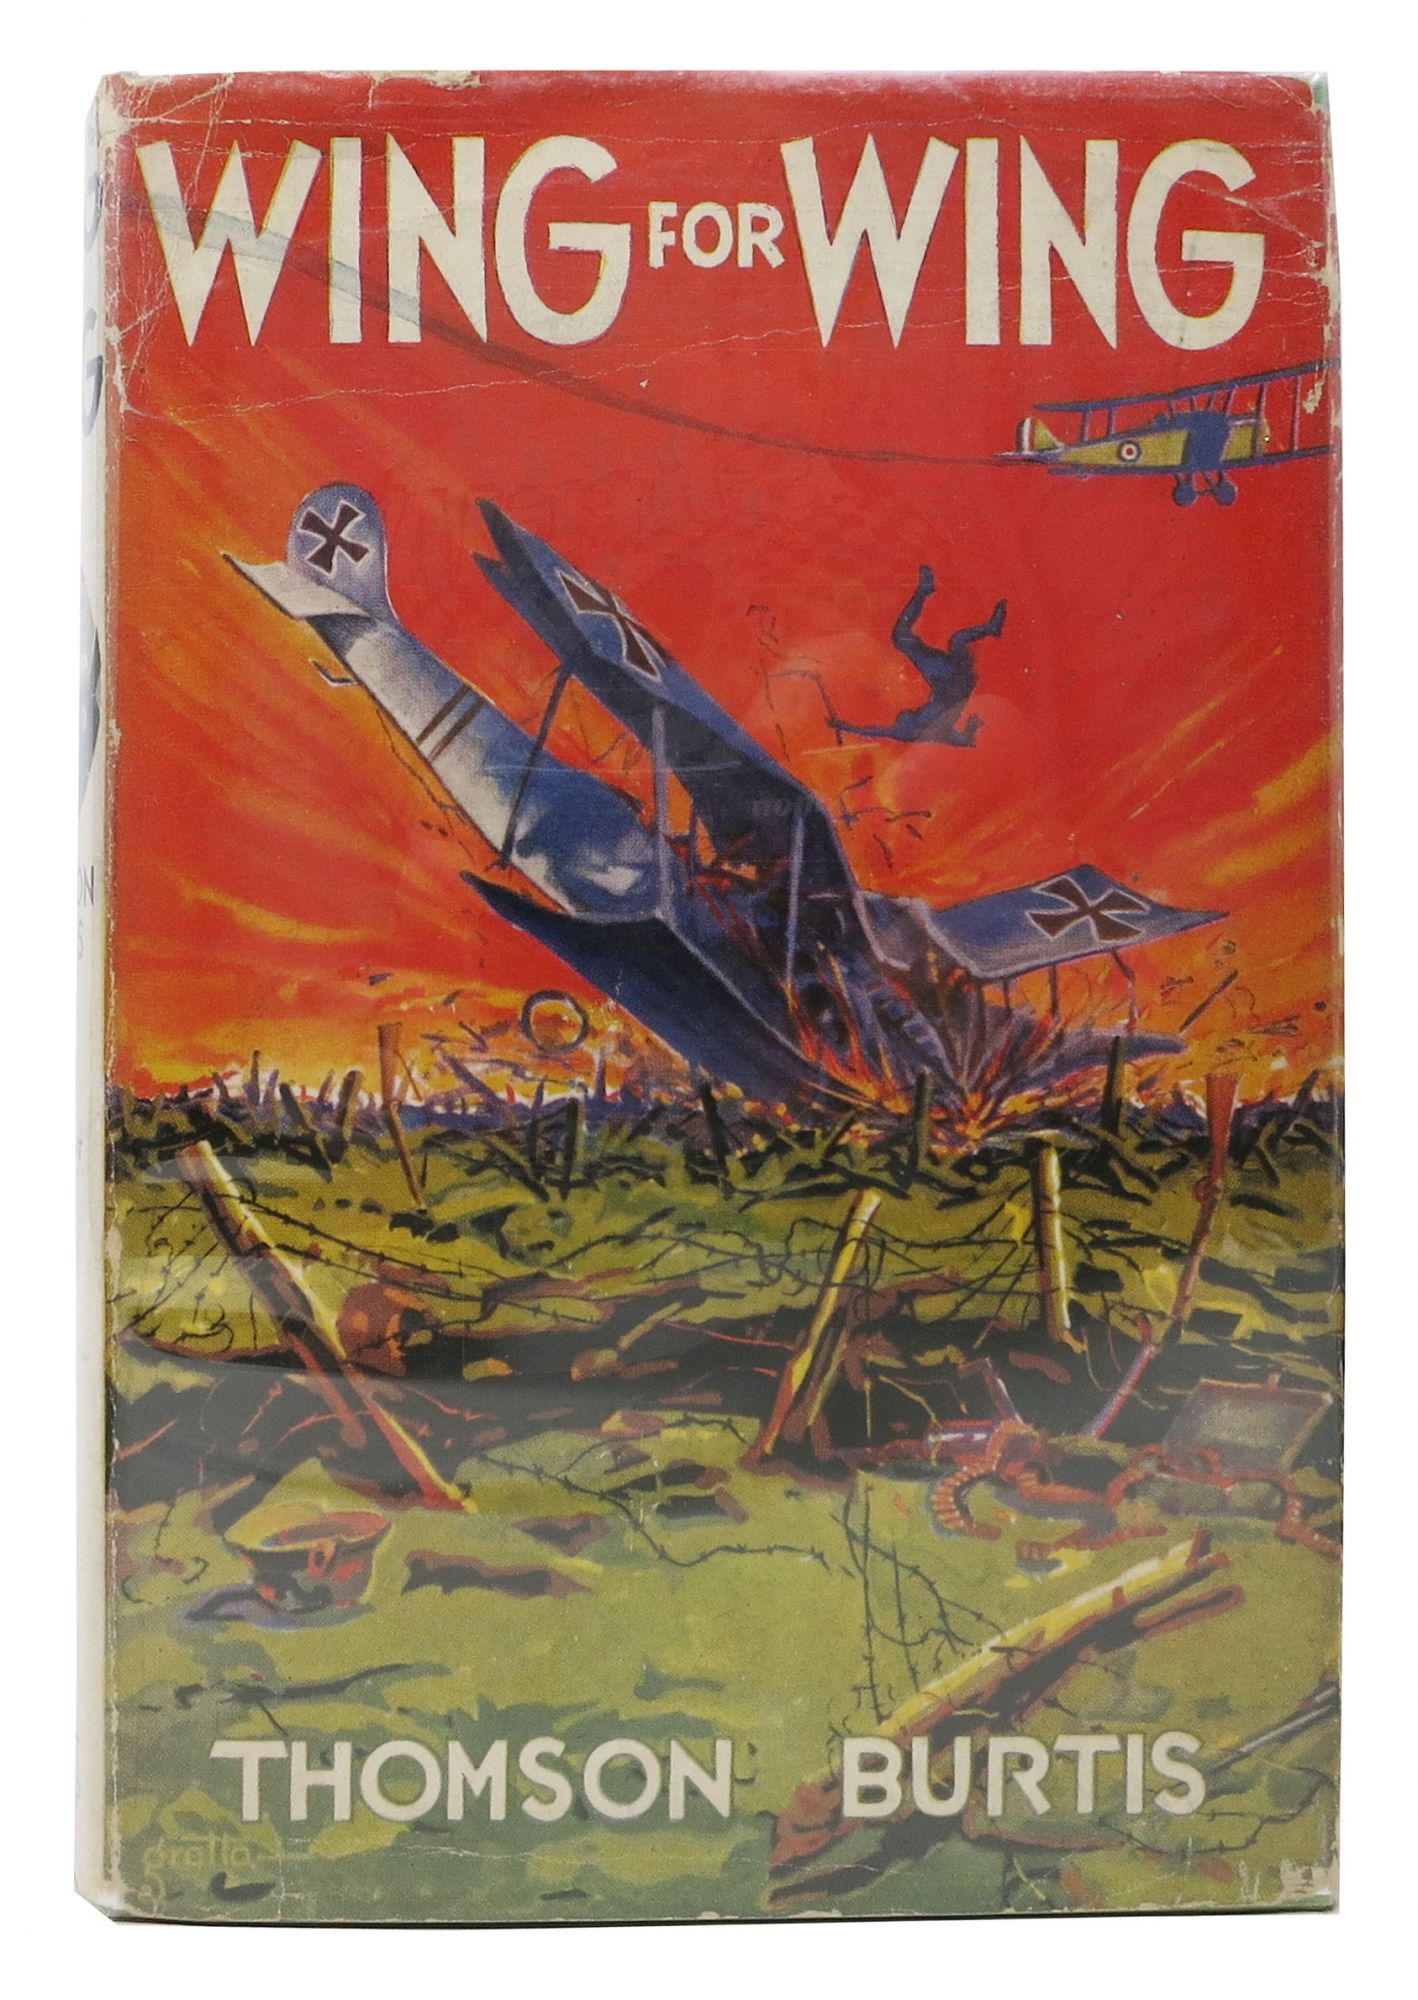 Burtis, Thomson - WING For WING. Air Combat Stories for Boys #3